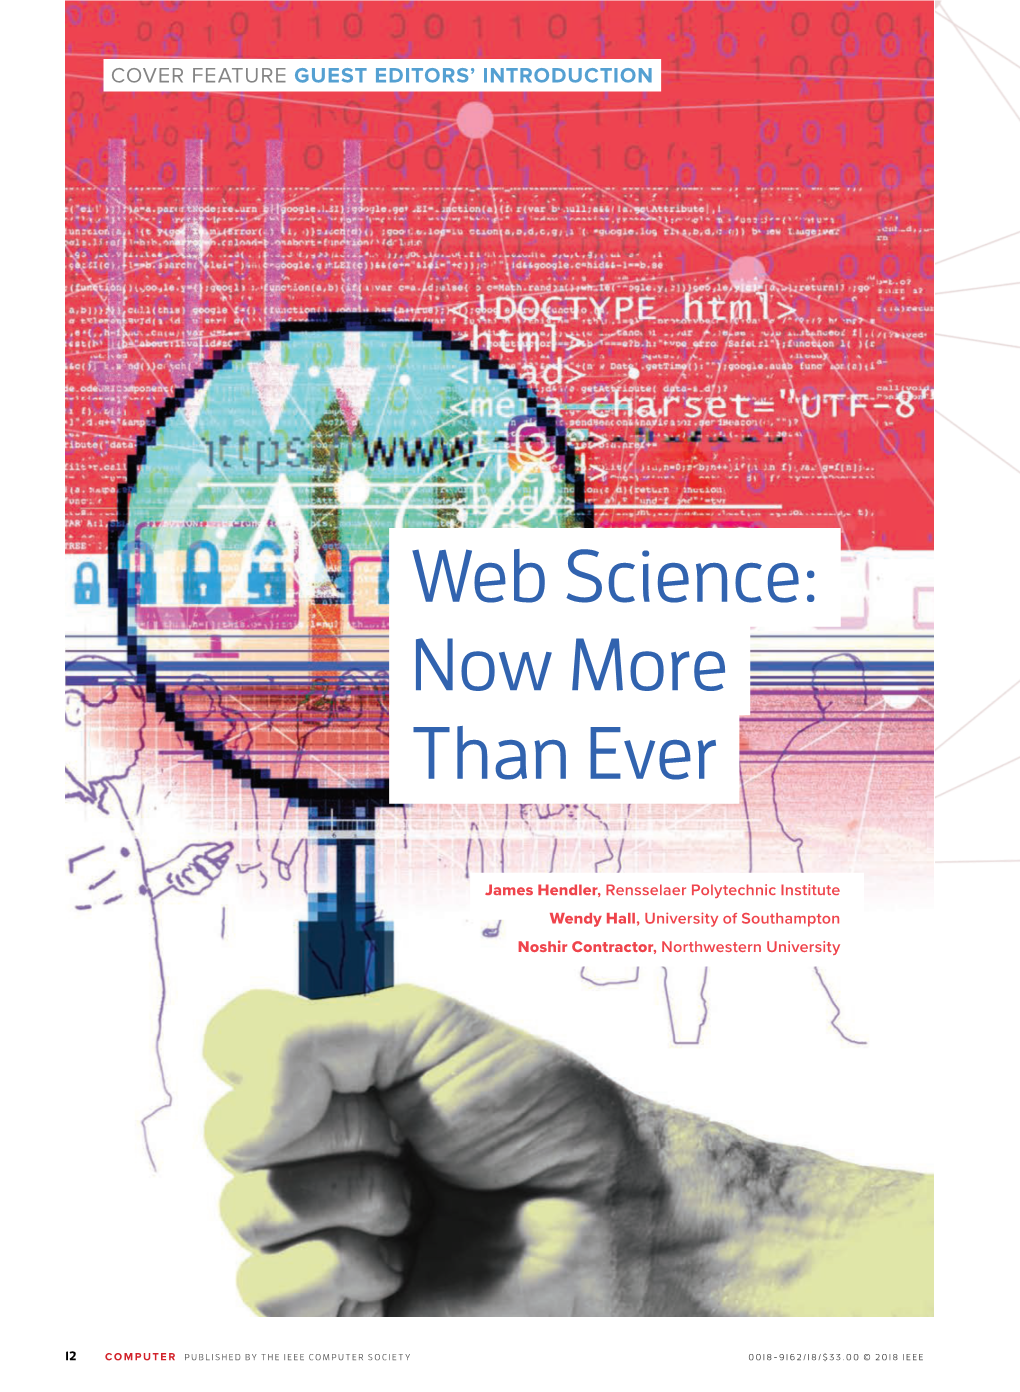 Web Science: Now More Than Ever